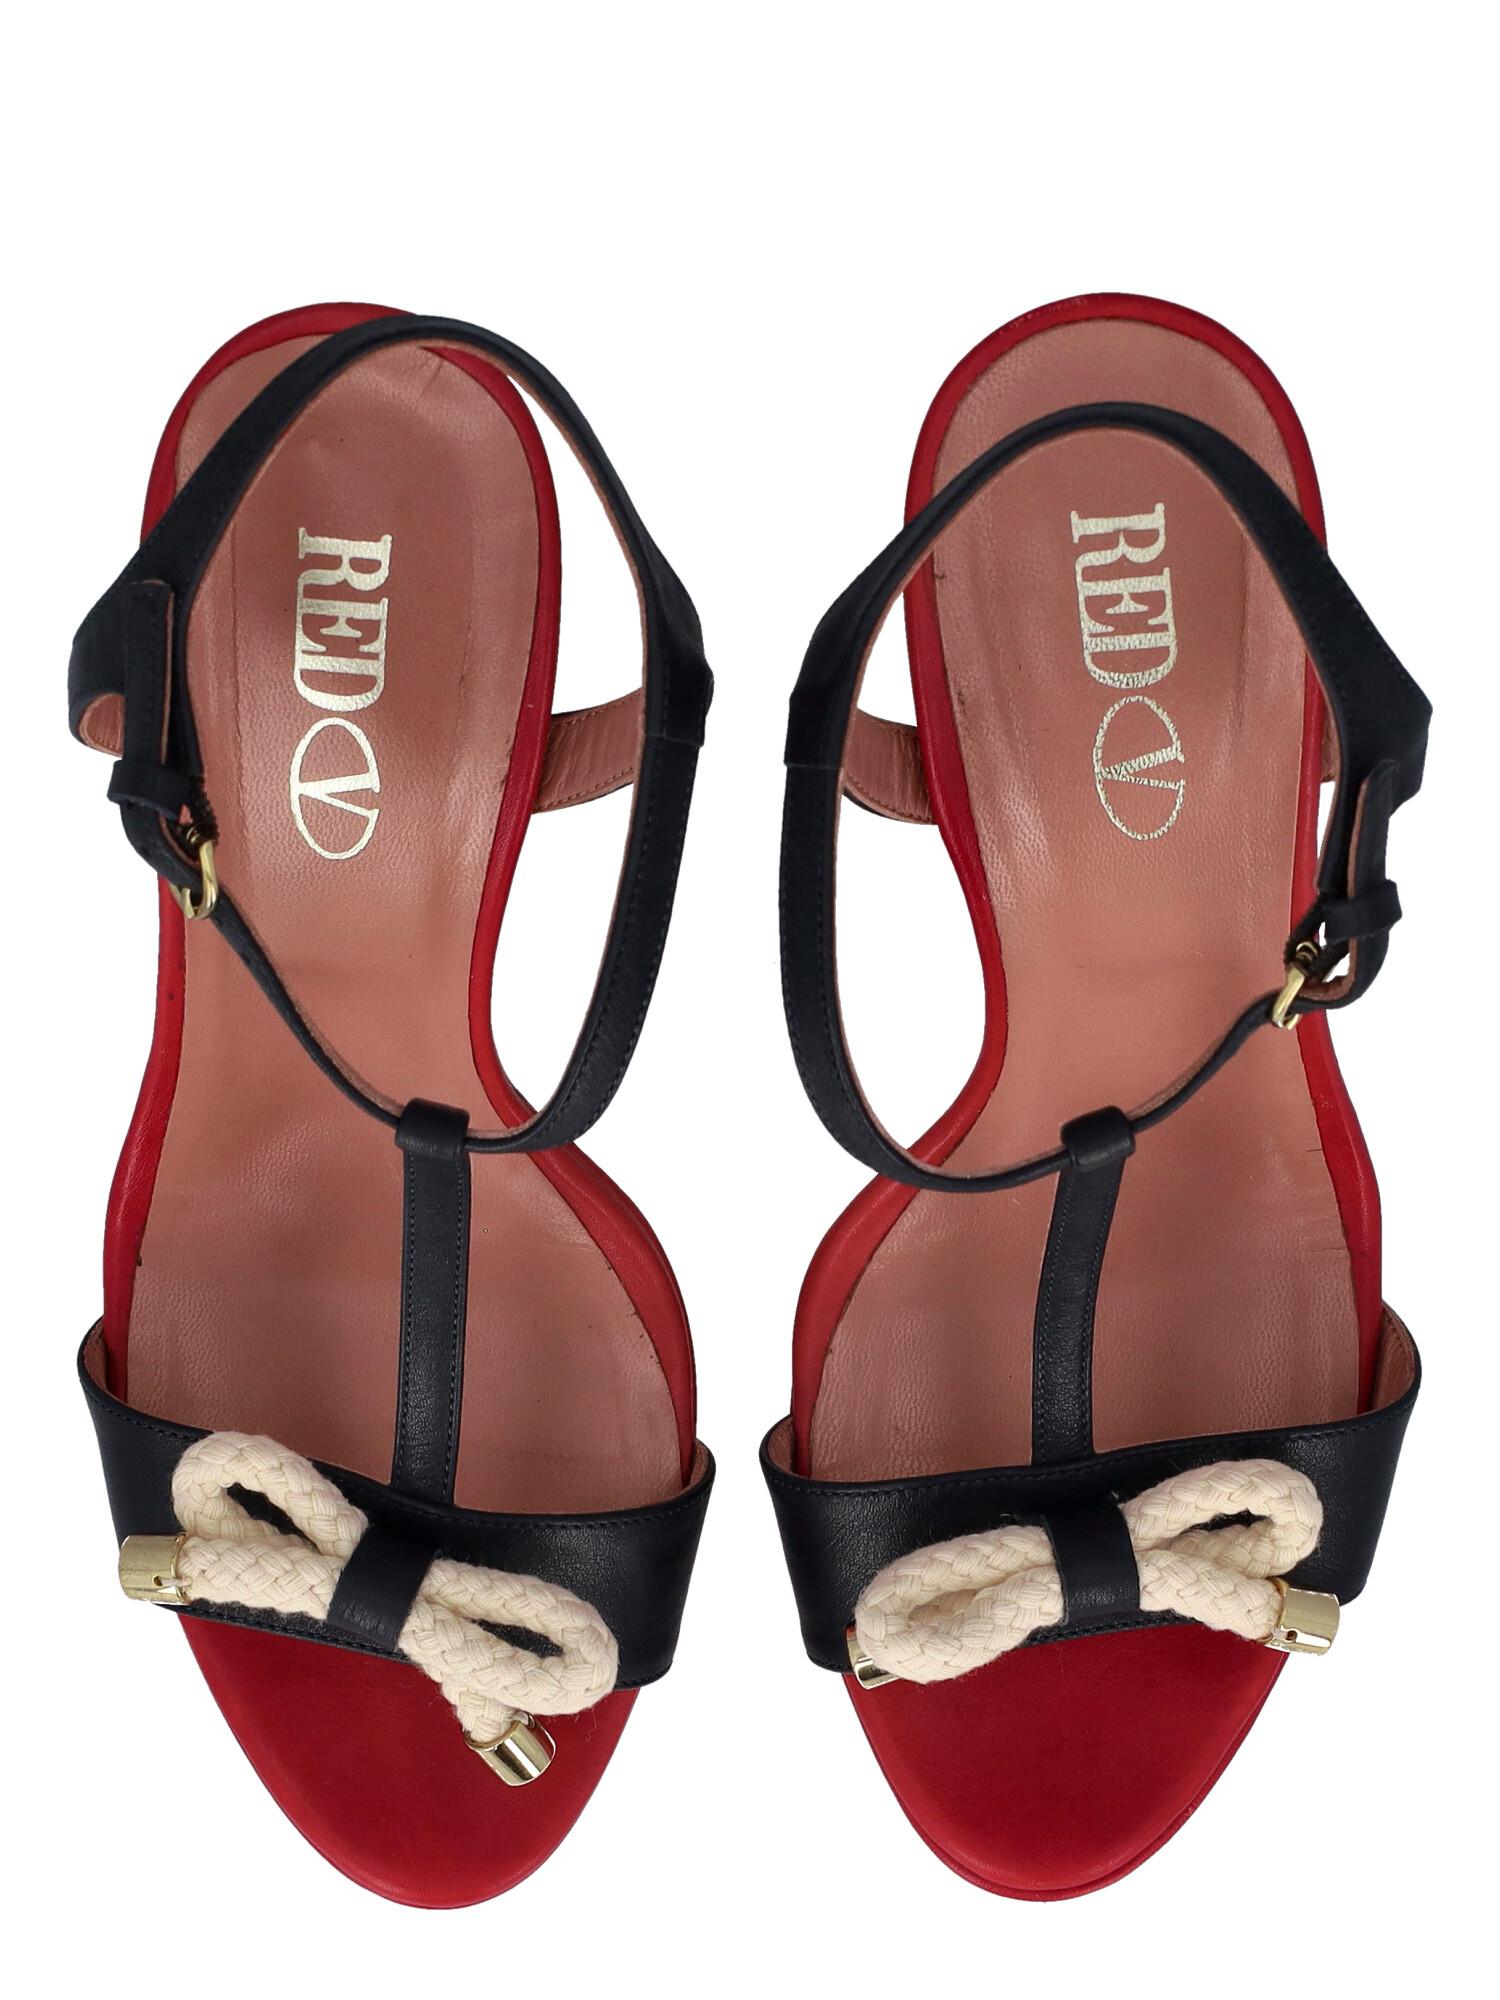 Red Valentino Women Sandals Navy, Red Leather EU 40 For Sale 1